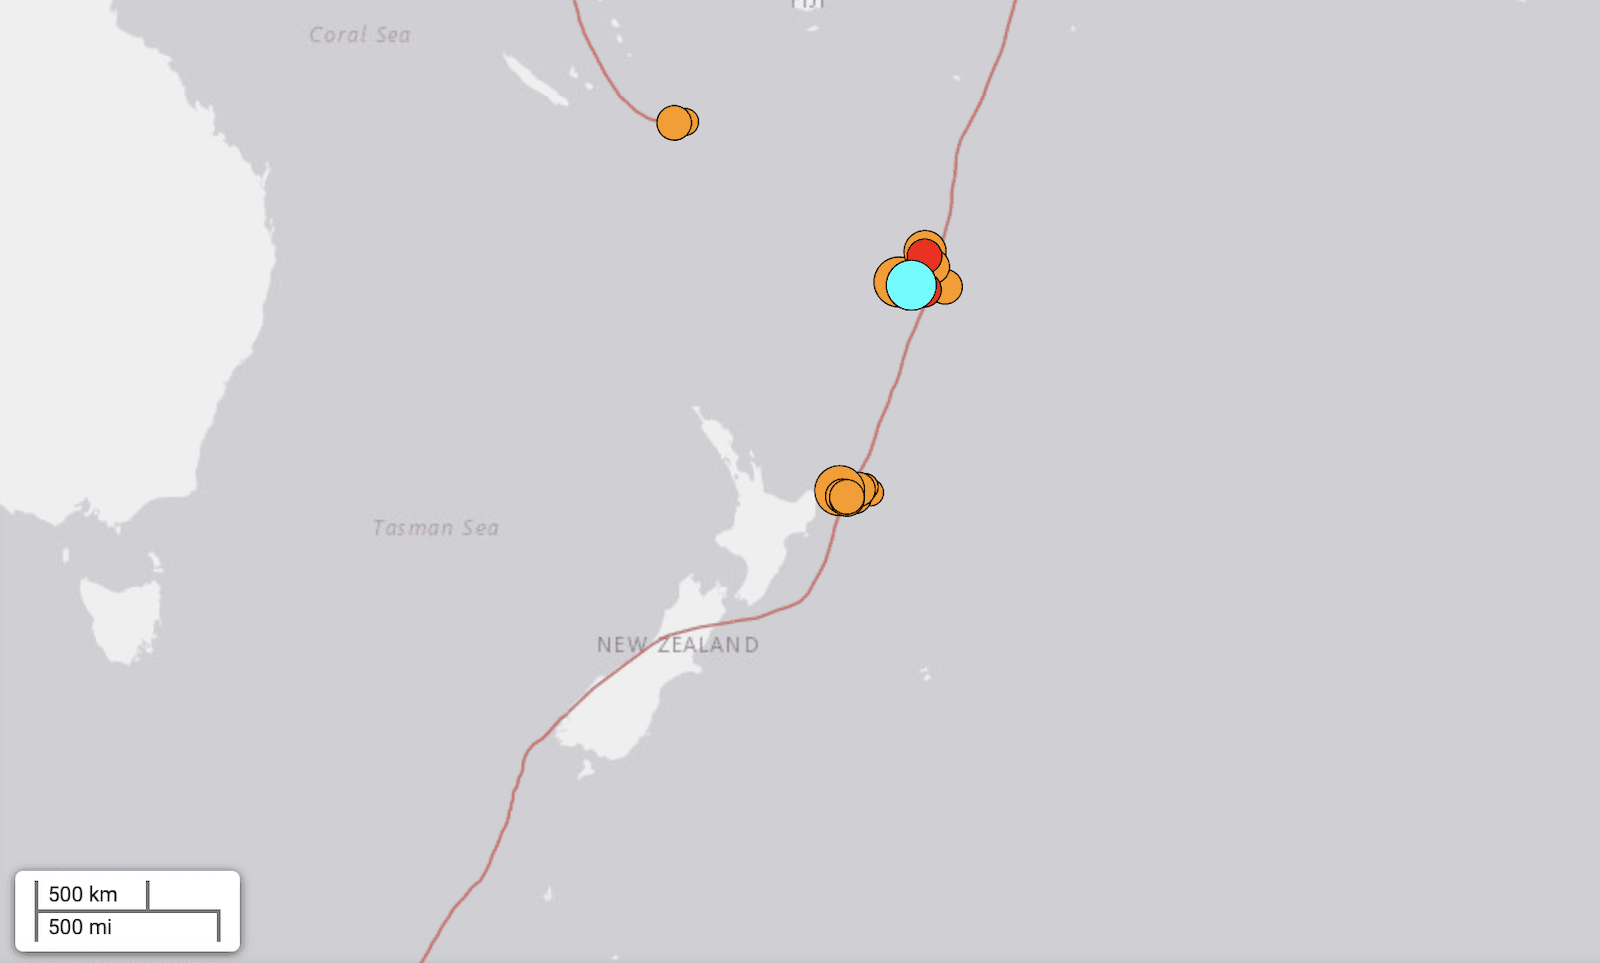 Tsunami Alerts Issued in Pacific After 8.1 Magnitude Earthquake Strikes New Zealand